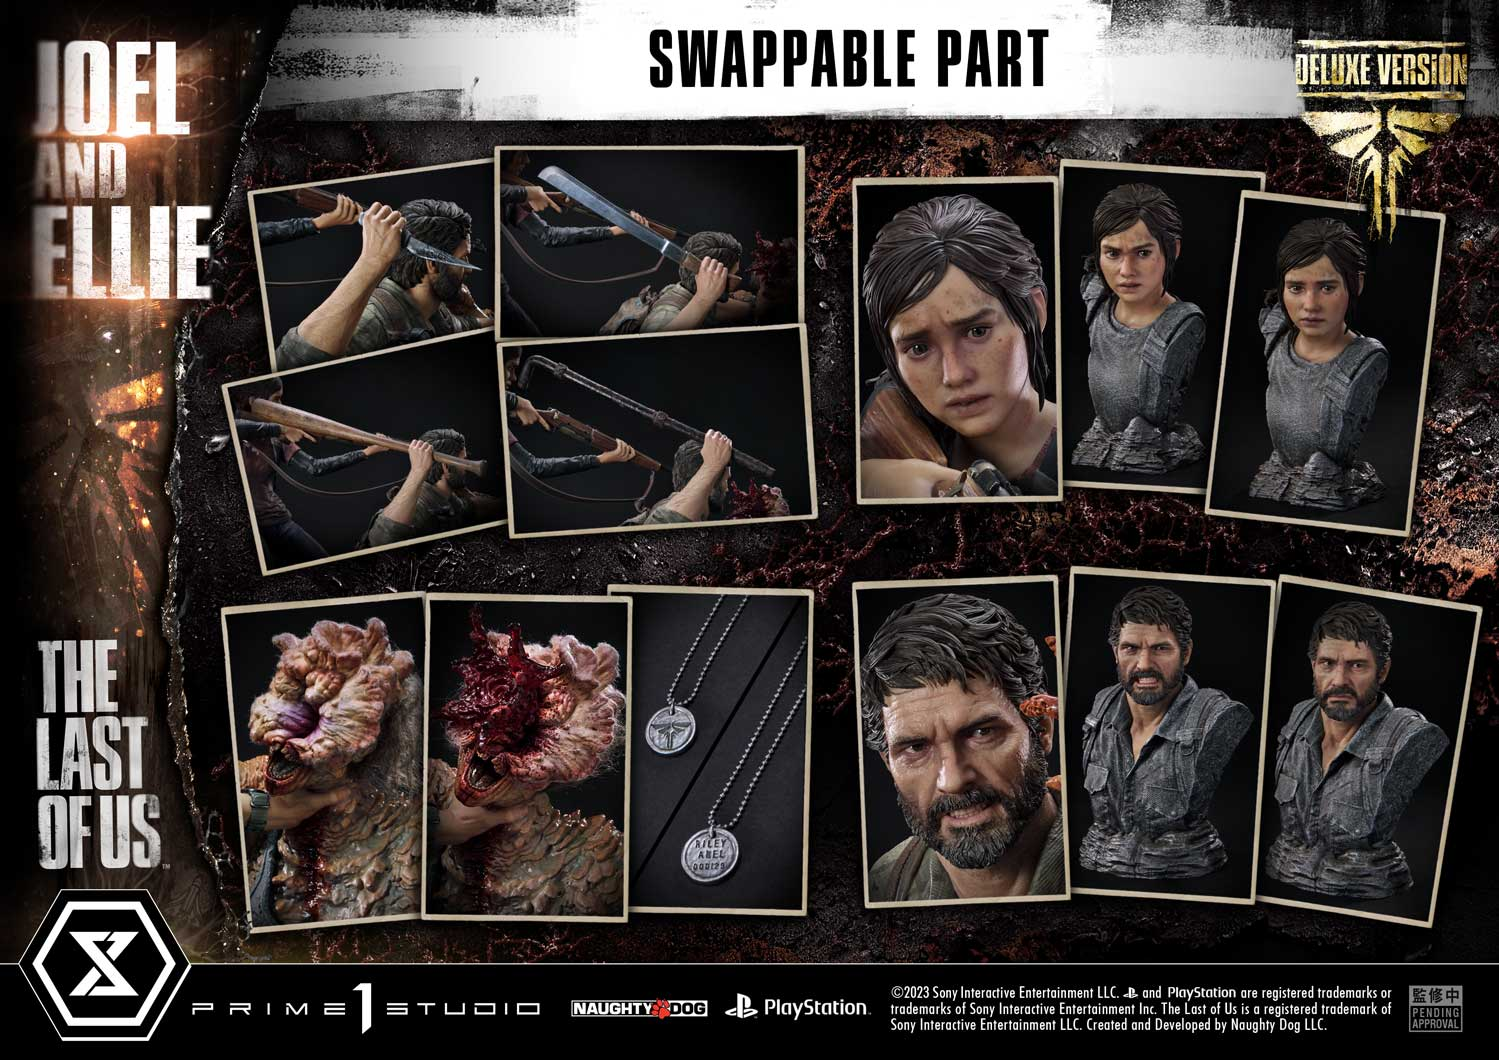 The Last of Us Special Edition comes in Joel and Ellie versions